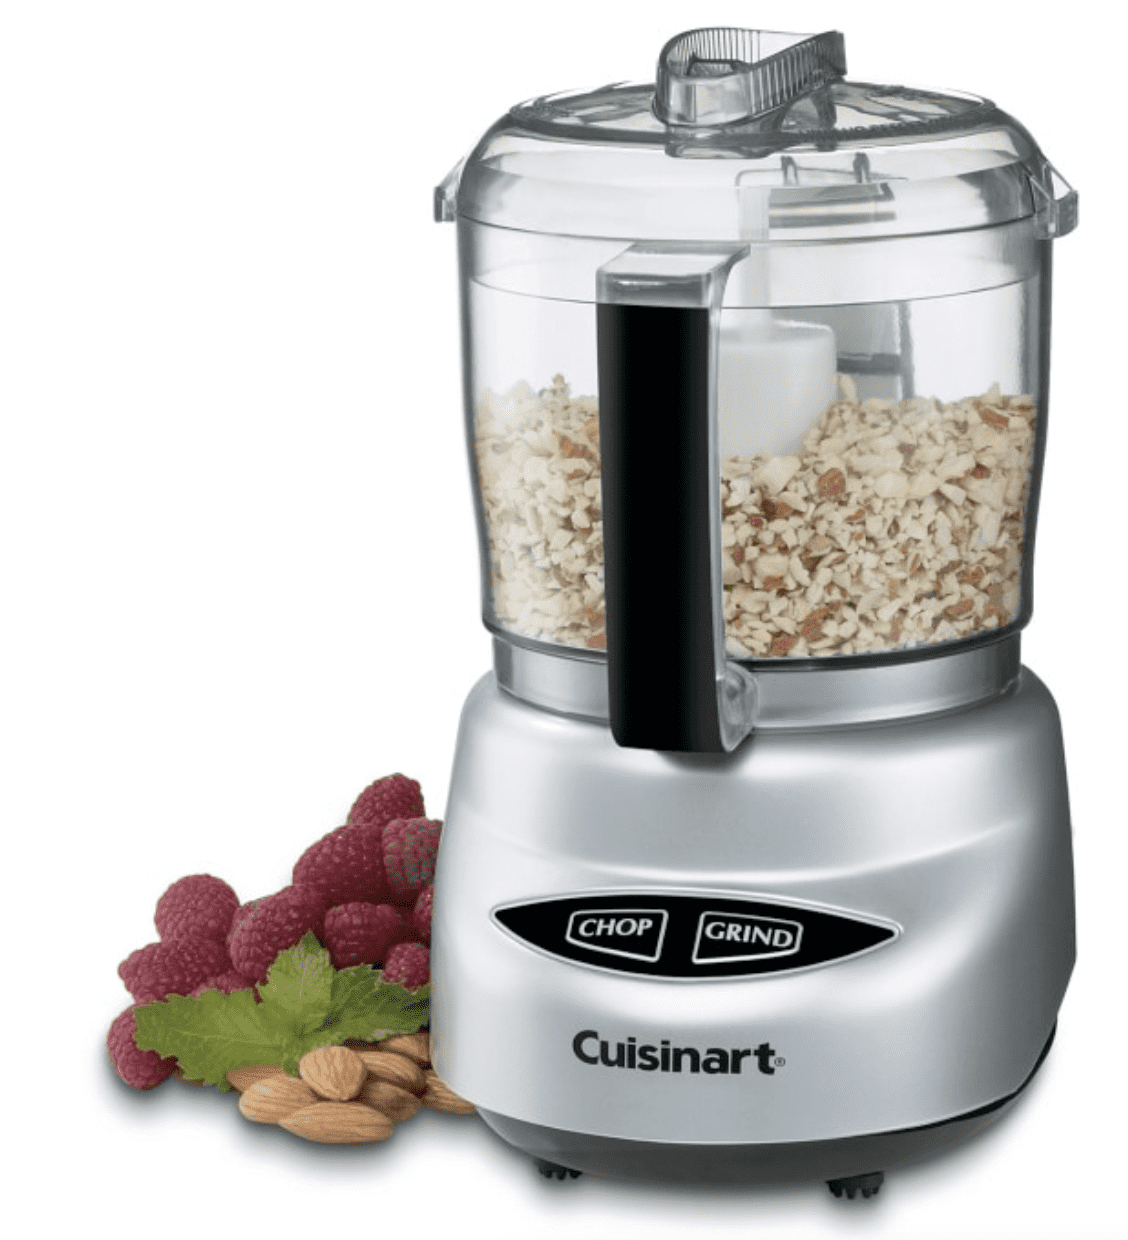 http://cdn.apartmenttherapy.info/image/upload/v1668723064/commerce/mini-food-processor.png